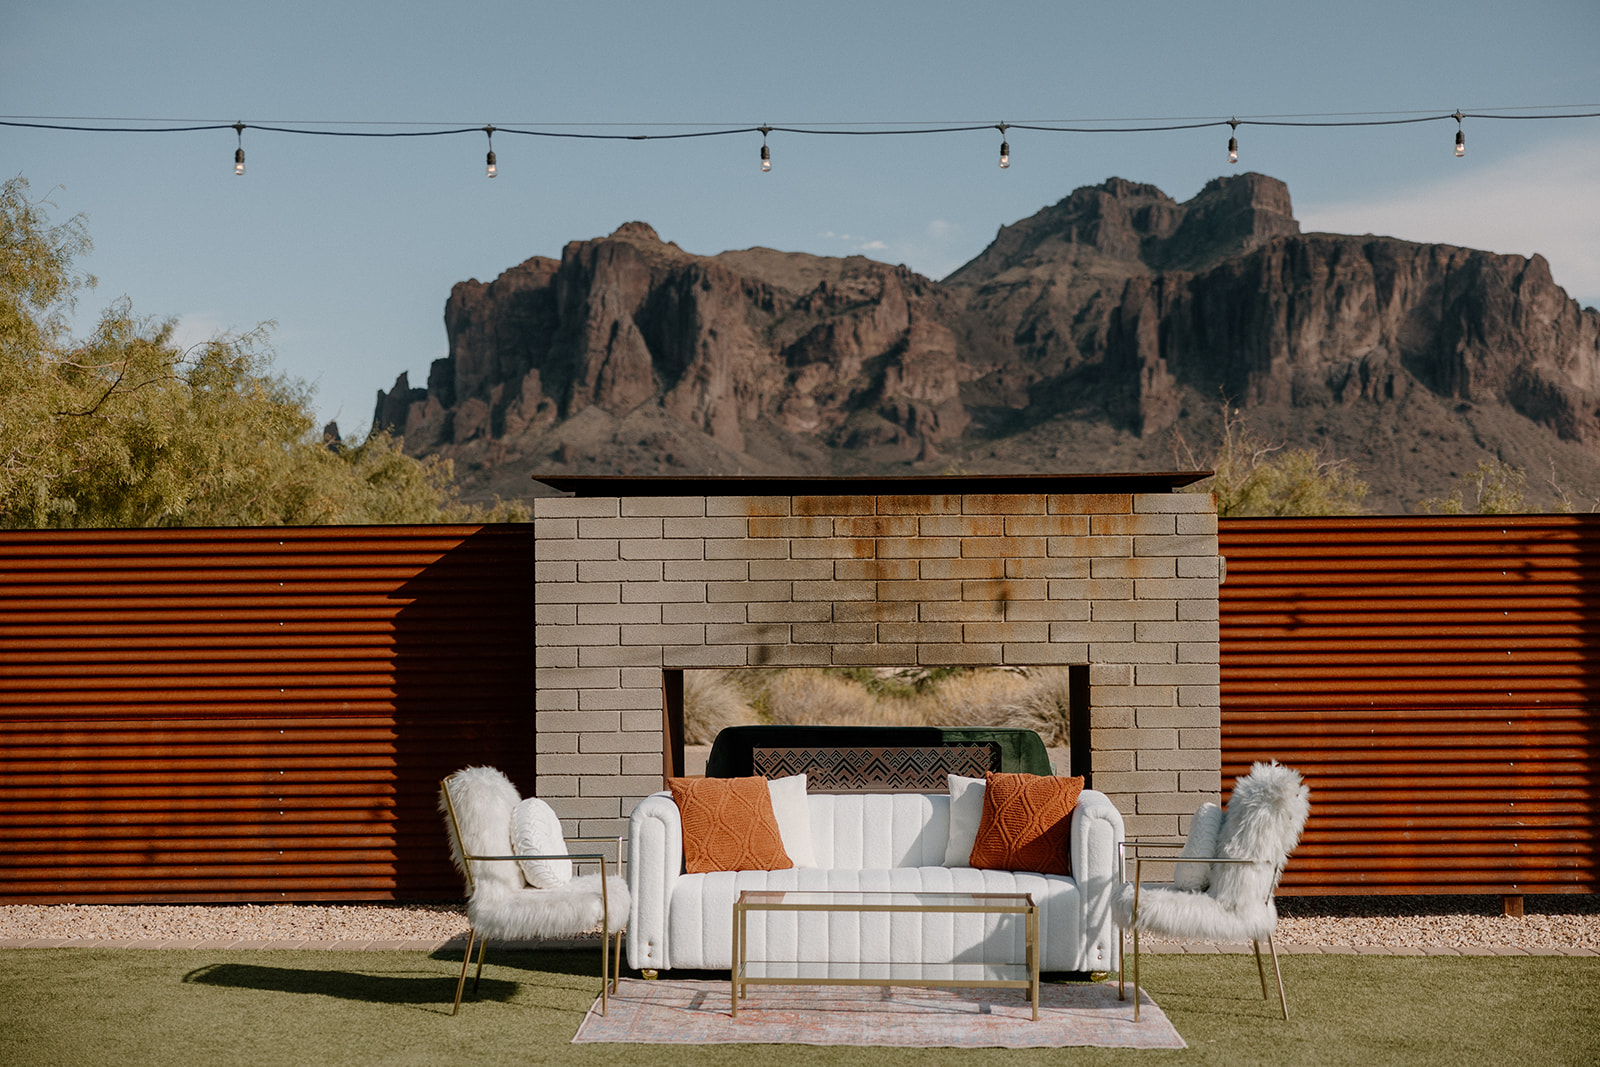 The Paseo venue at Apache Junction sits with a stunning view of the Arizona nature